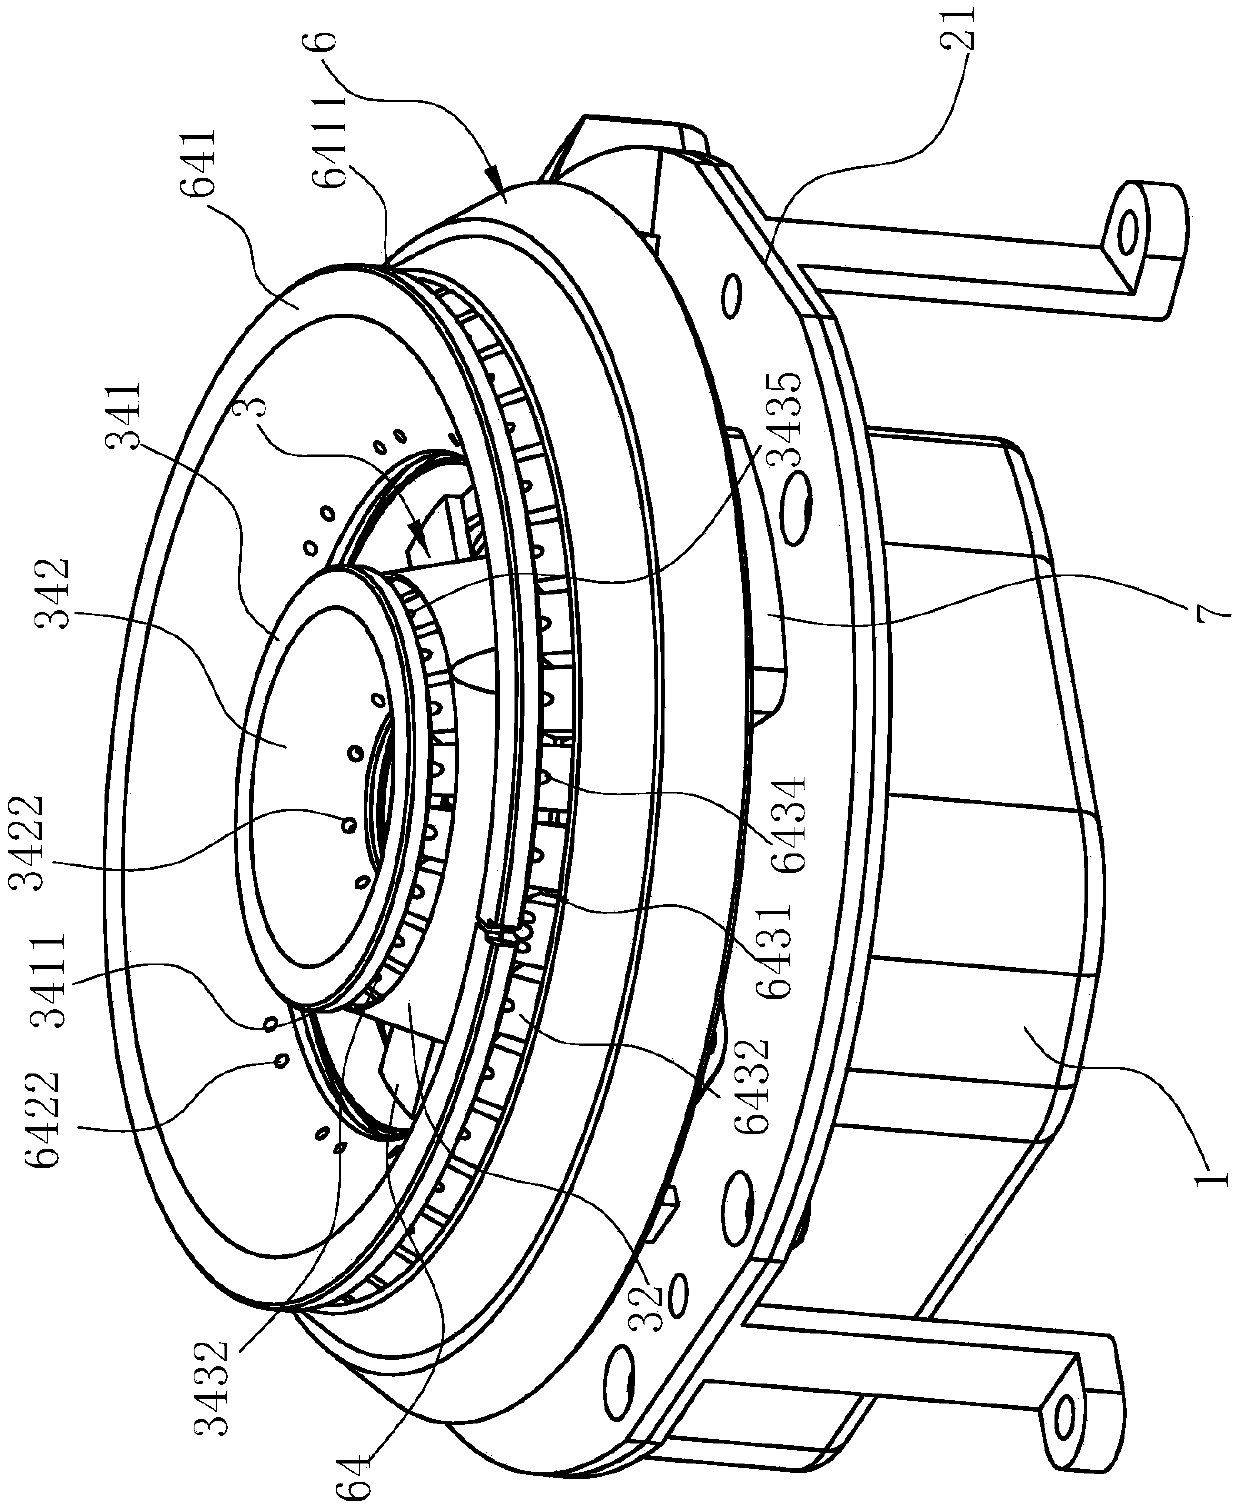 Upper air inlet combustor